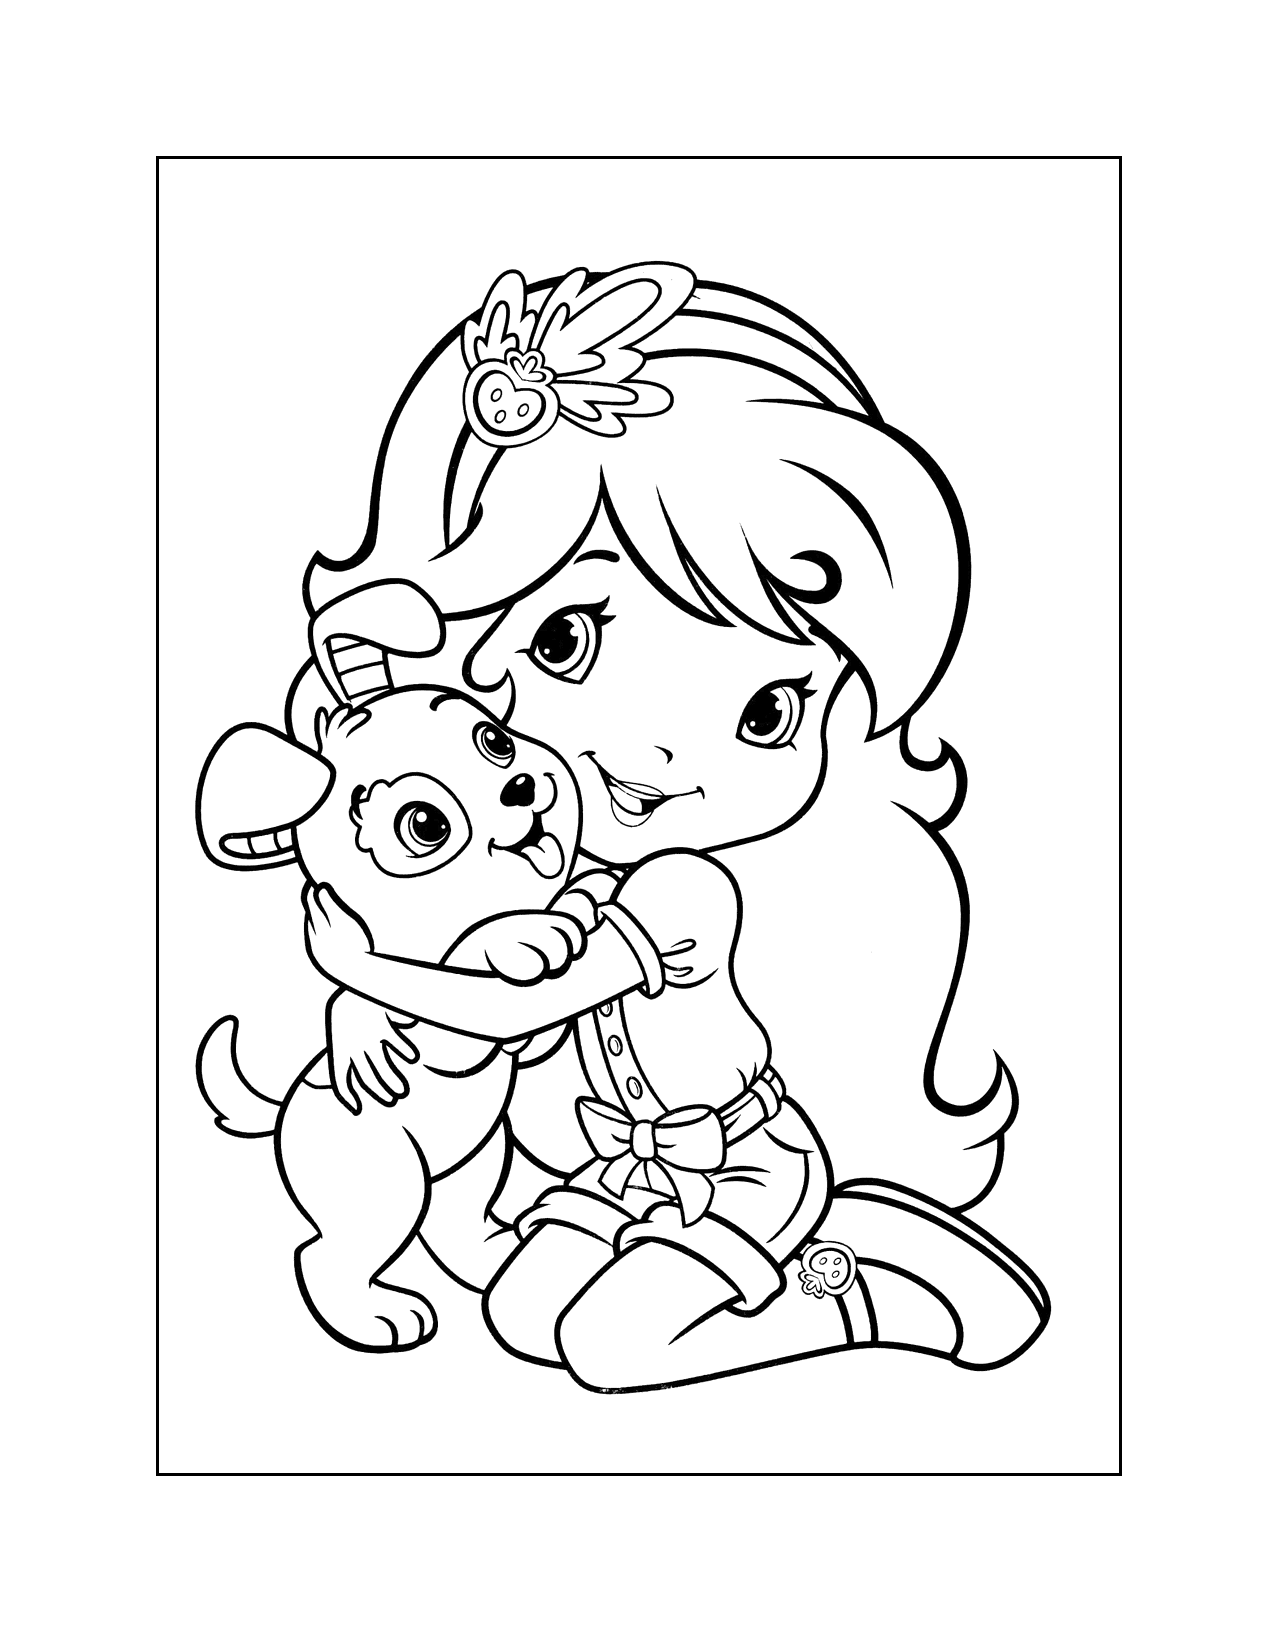 Strawberry Shortcake And Pupcake Coloring Page